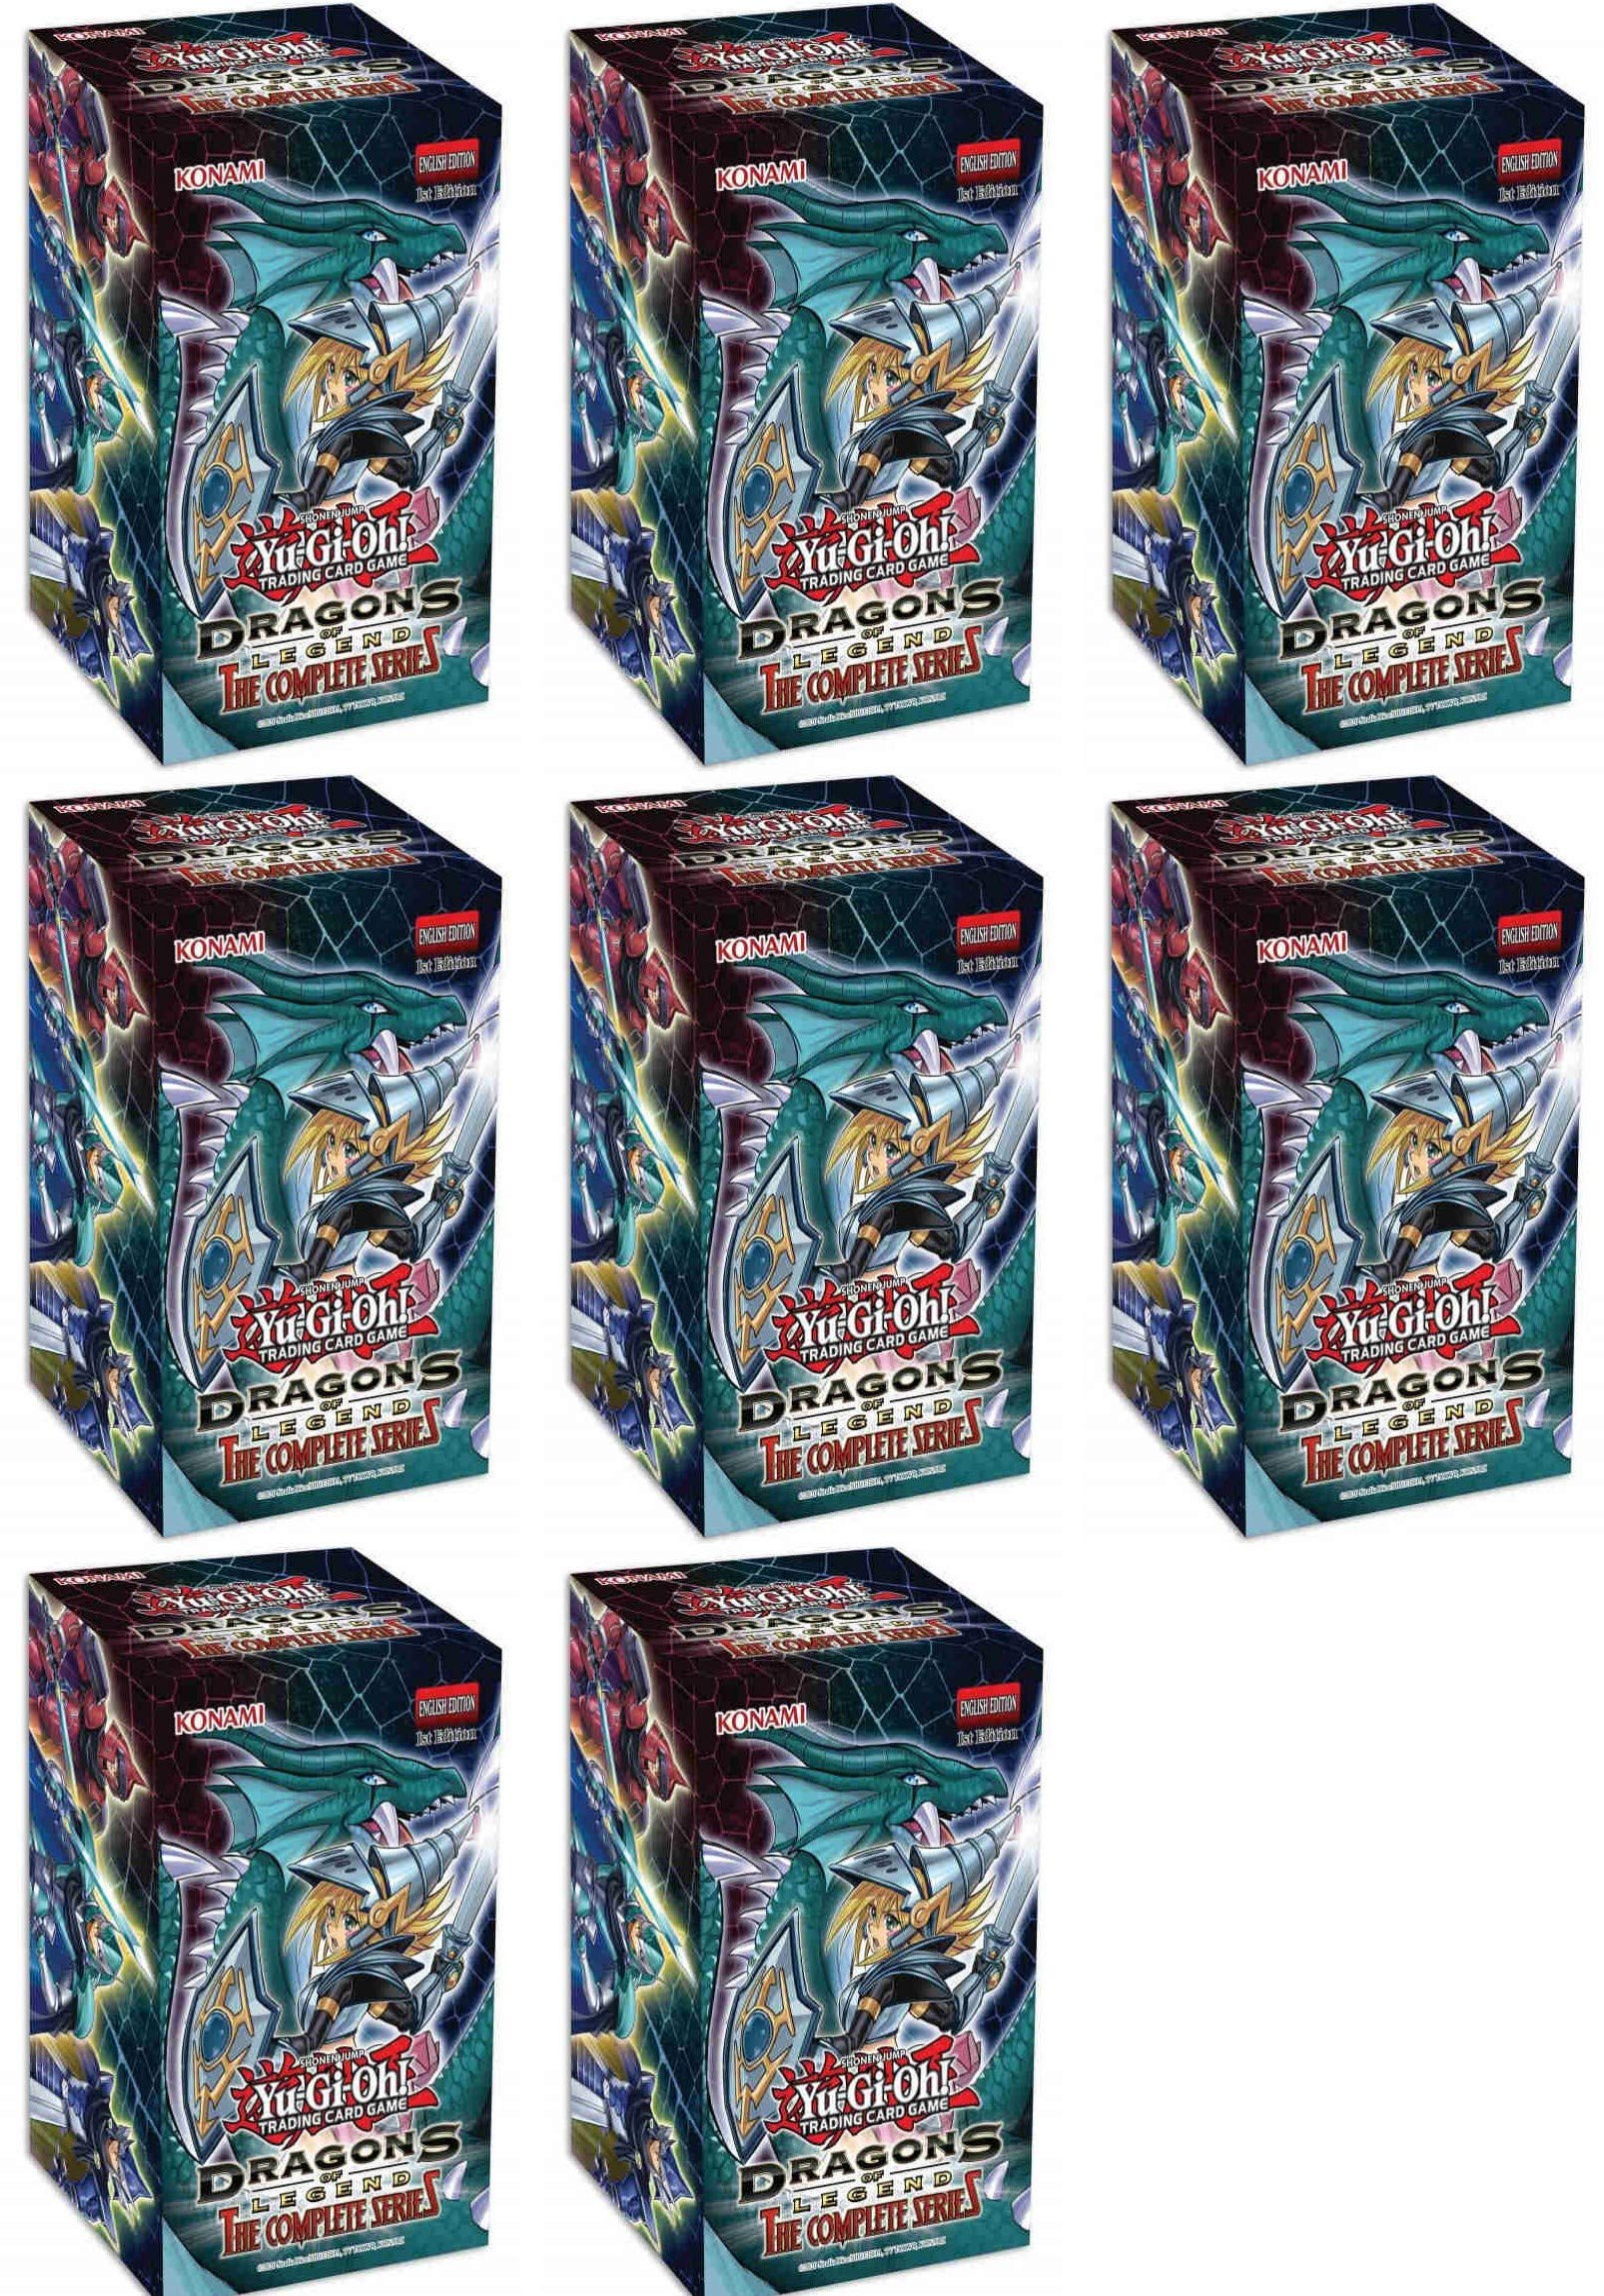 Yugioh Dragons of Legend The Complete Series Booster Display Box - 8 Mini-Boxes (36 Packs)